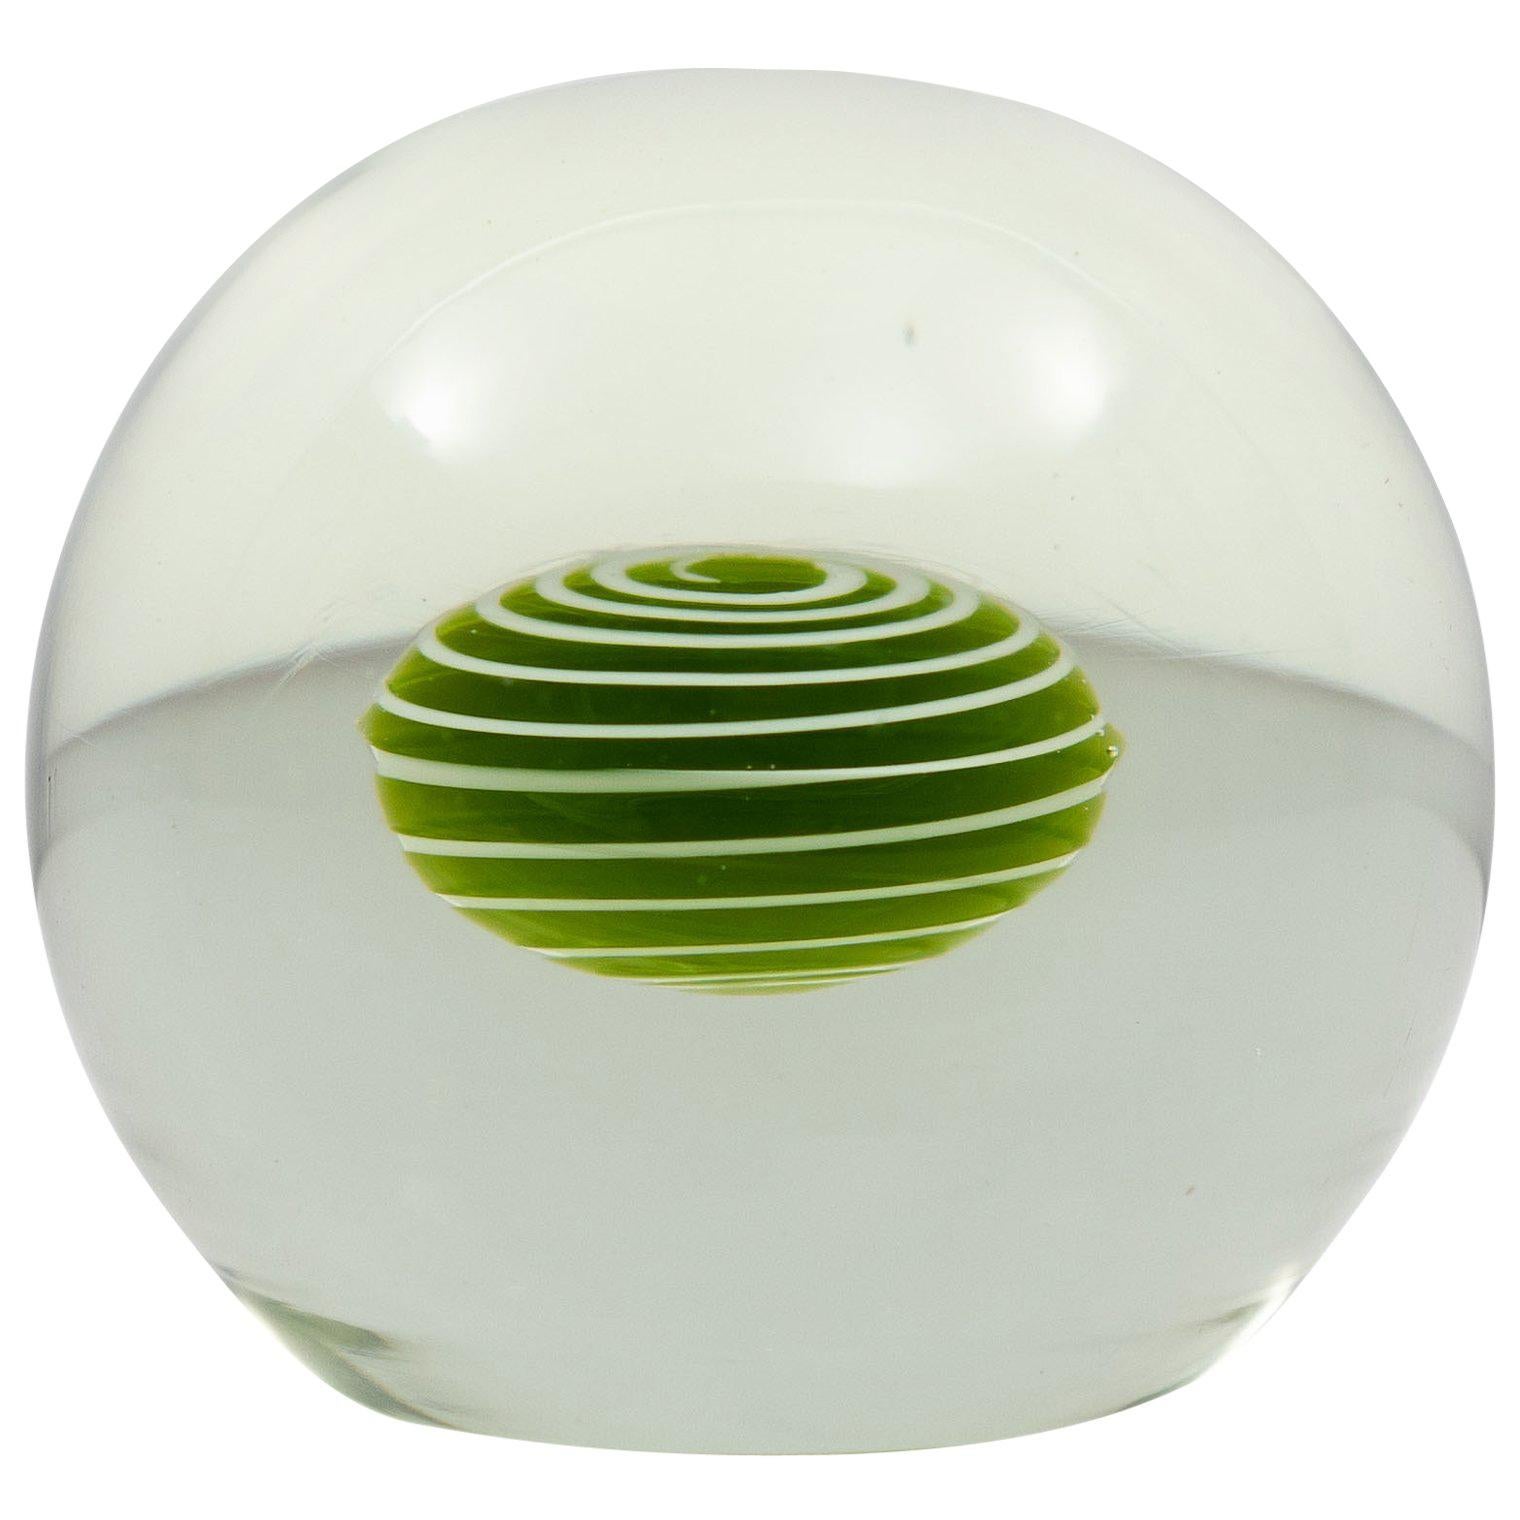 Large Murano Glass Paperweight with Green and White Swirled Core by Salviati